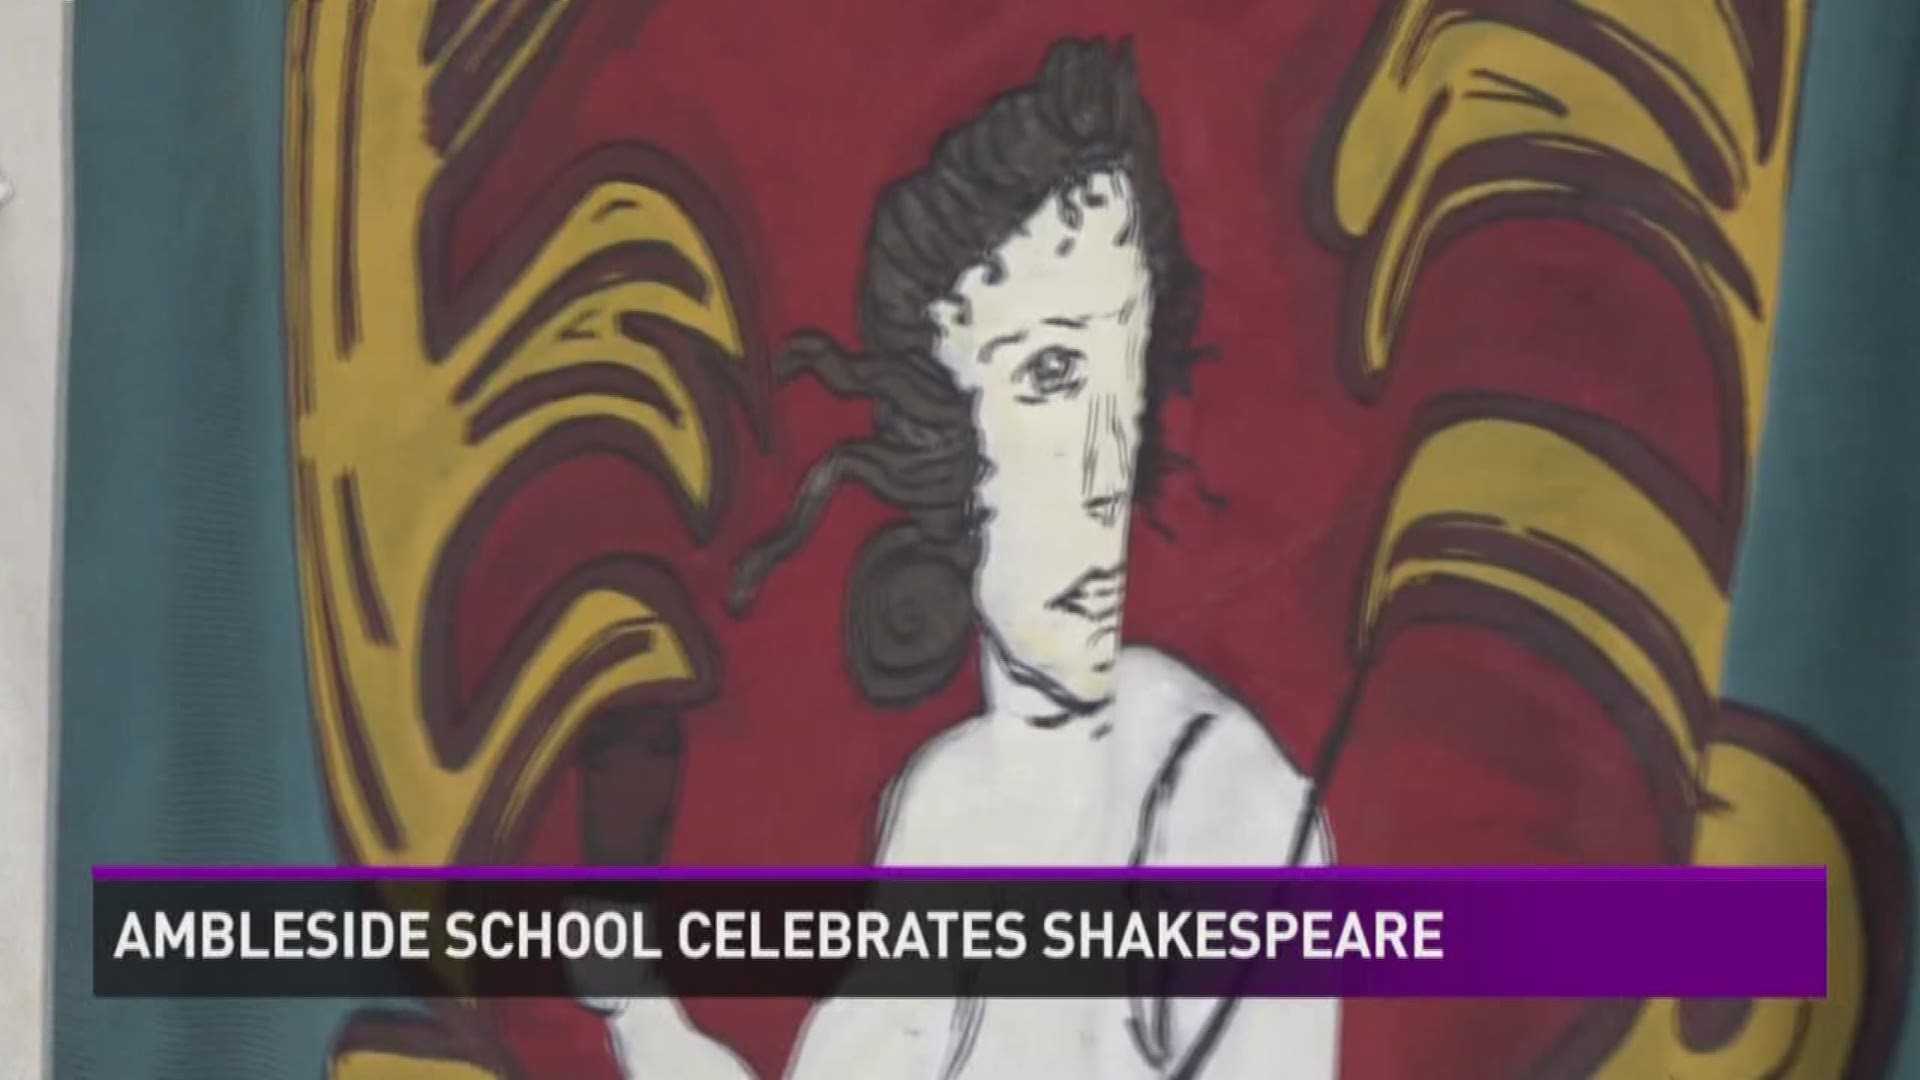 A famous playwright go this moment in the spotlight, as Ambleside School of San Angelo celebrated Shakespeare.